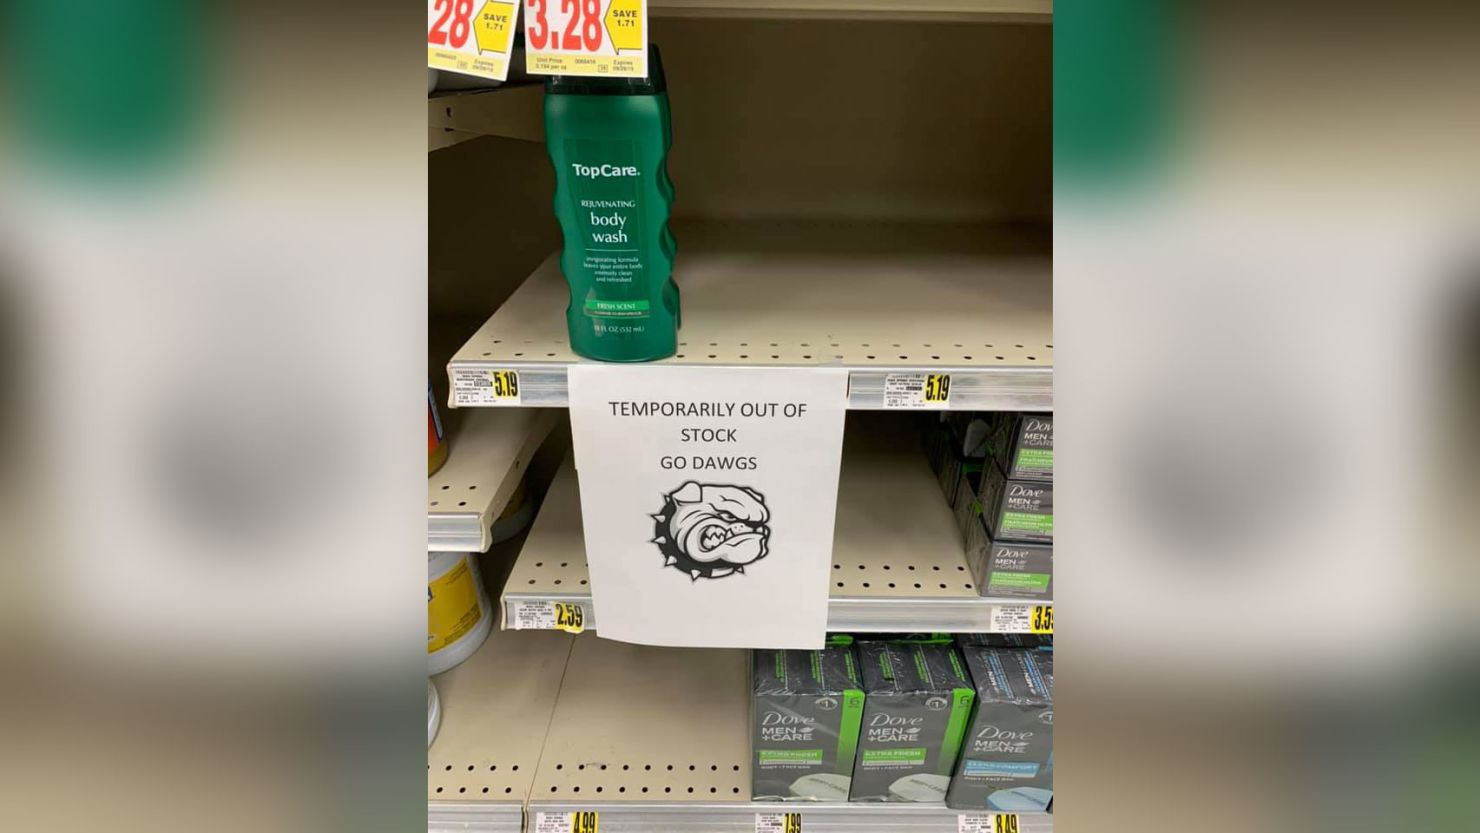 A Georgia supermarket told customers that its Irish Spring products were out of stock ahead of the Georgia vs. Notre Dame college football game.